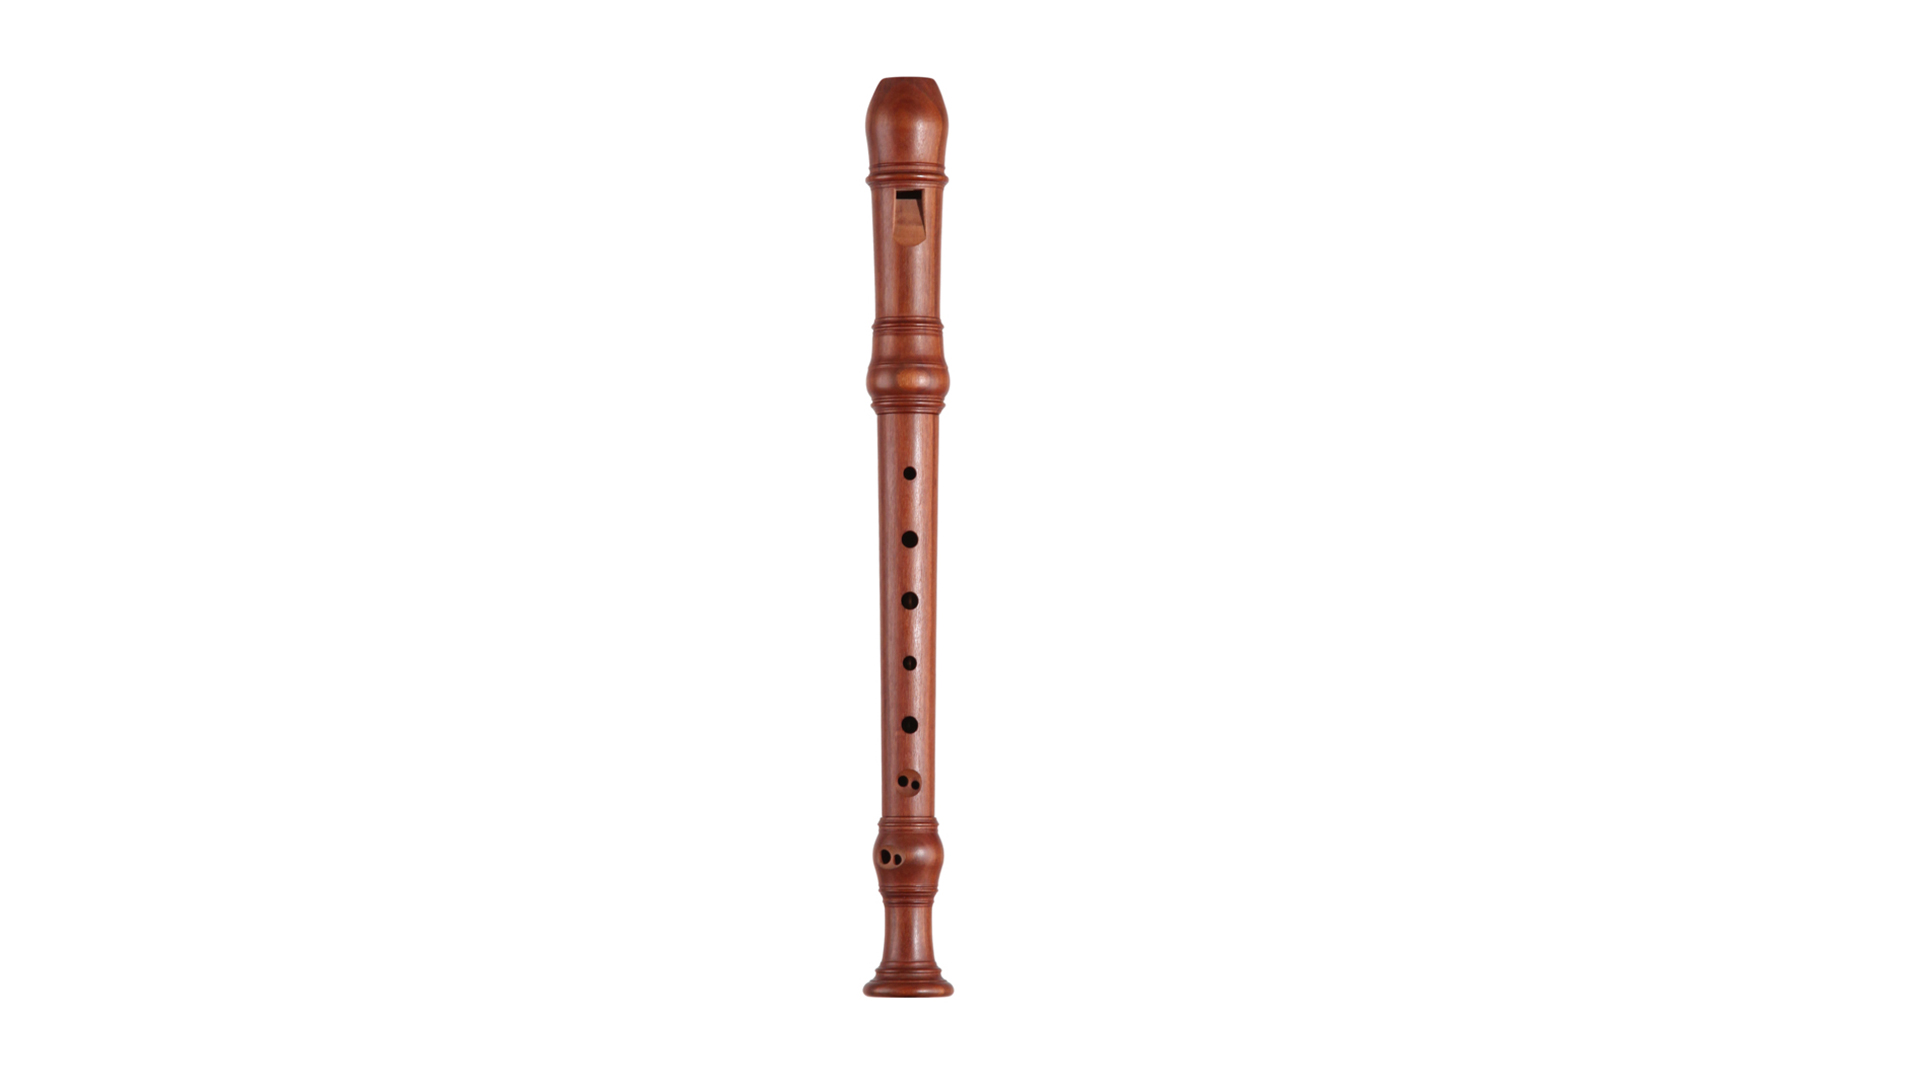 Huber, early baroque, "Master", soprano in c'', baroque double hole, 442 Hz, plum